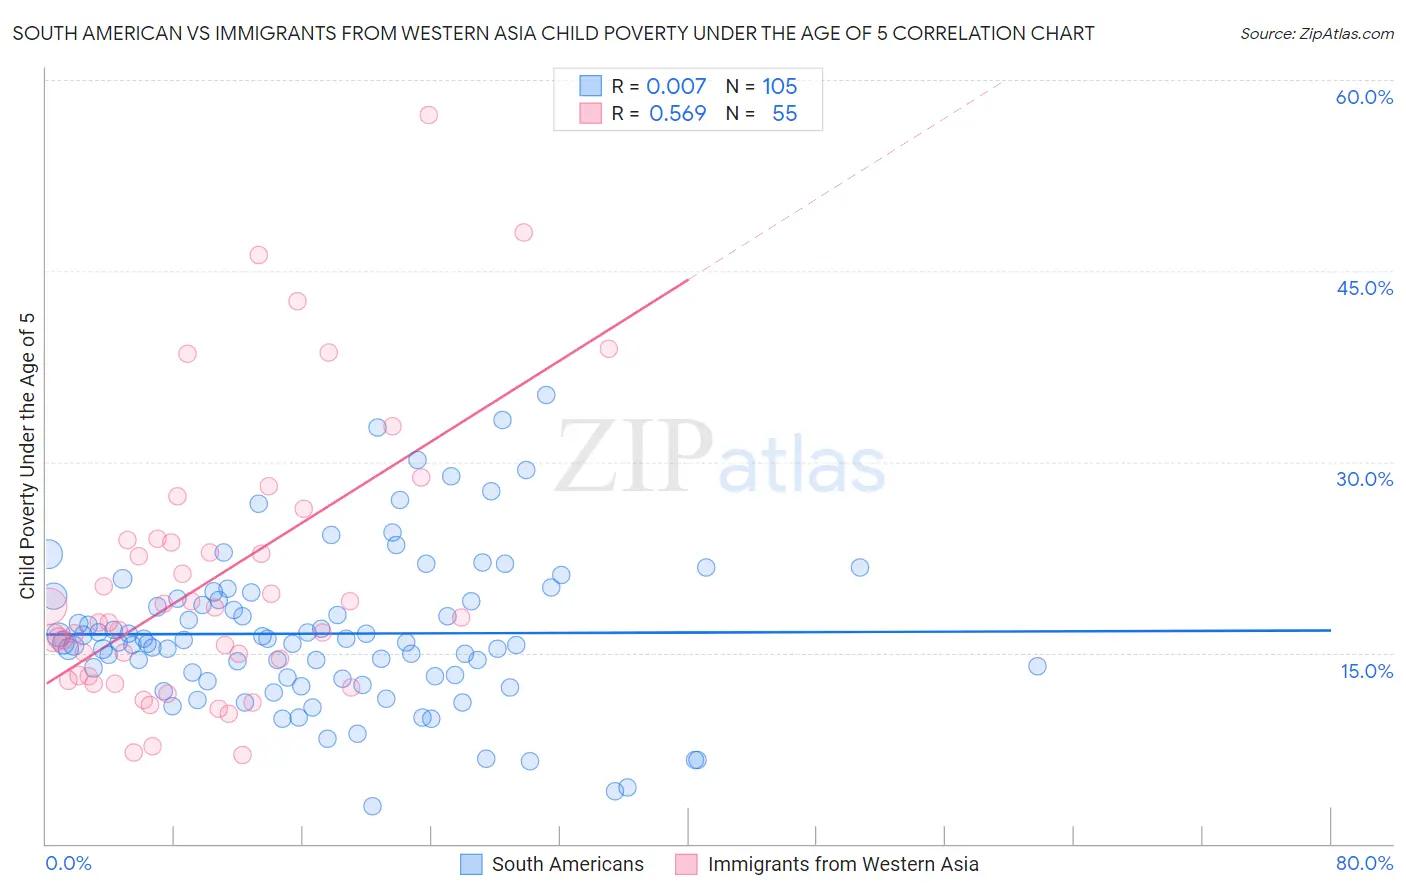 South American vs Immigrants from Western Asia Child Poverty Under the Age of 5